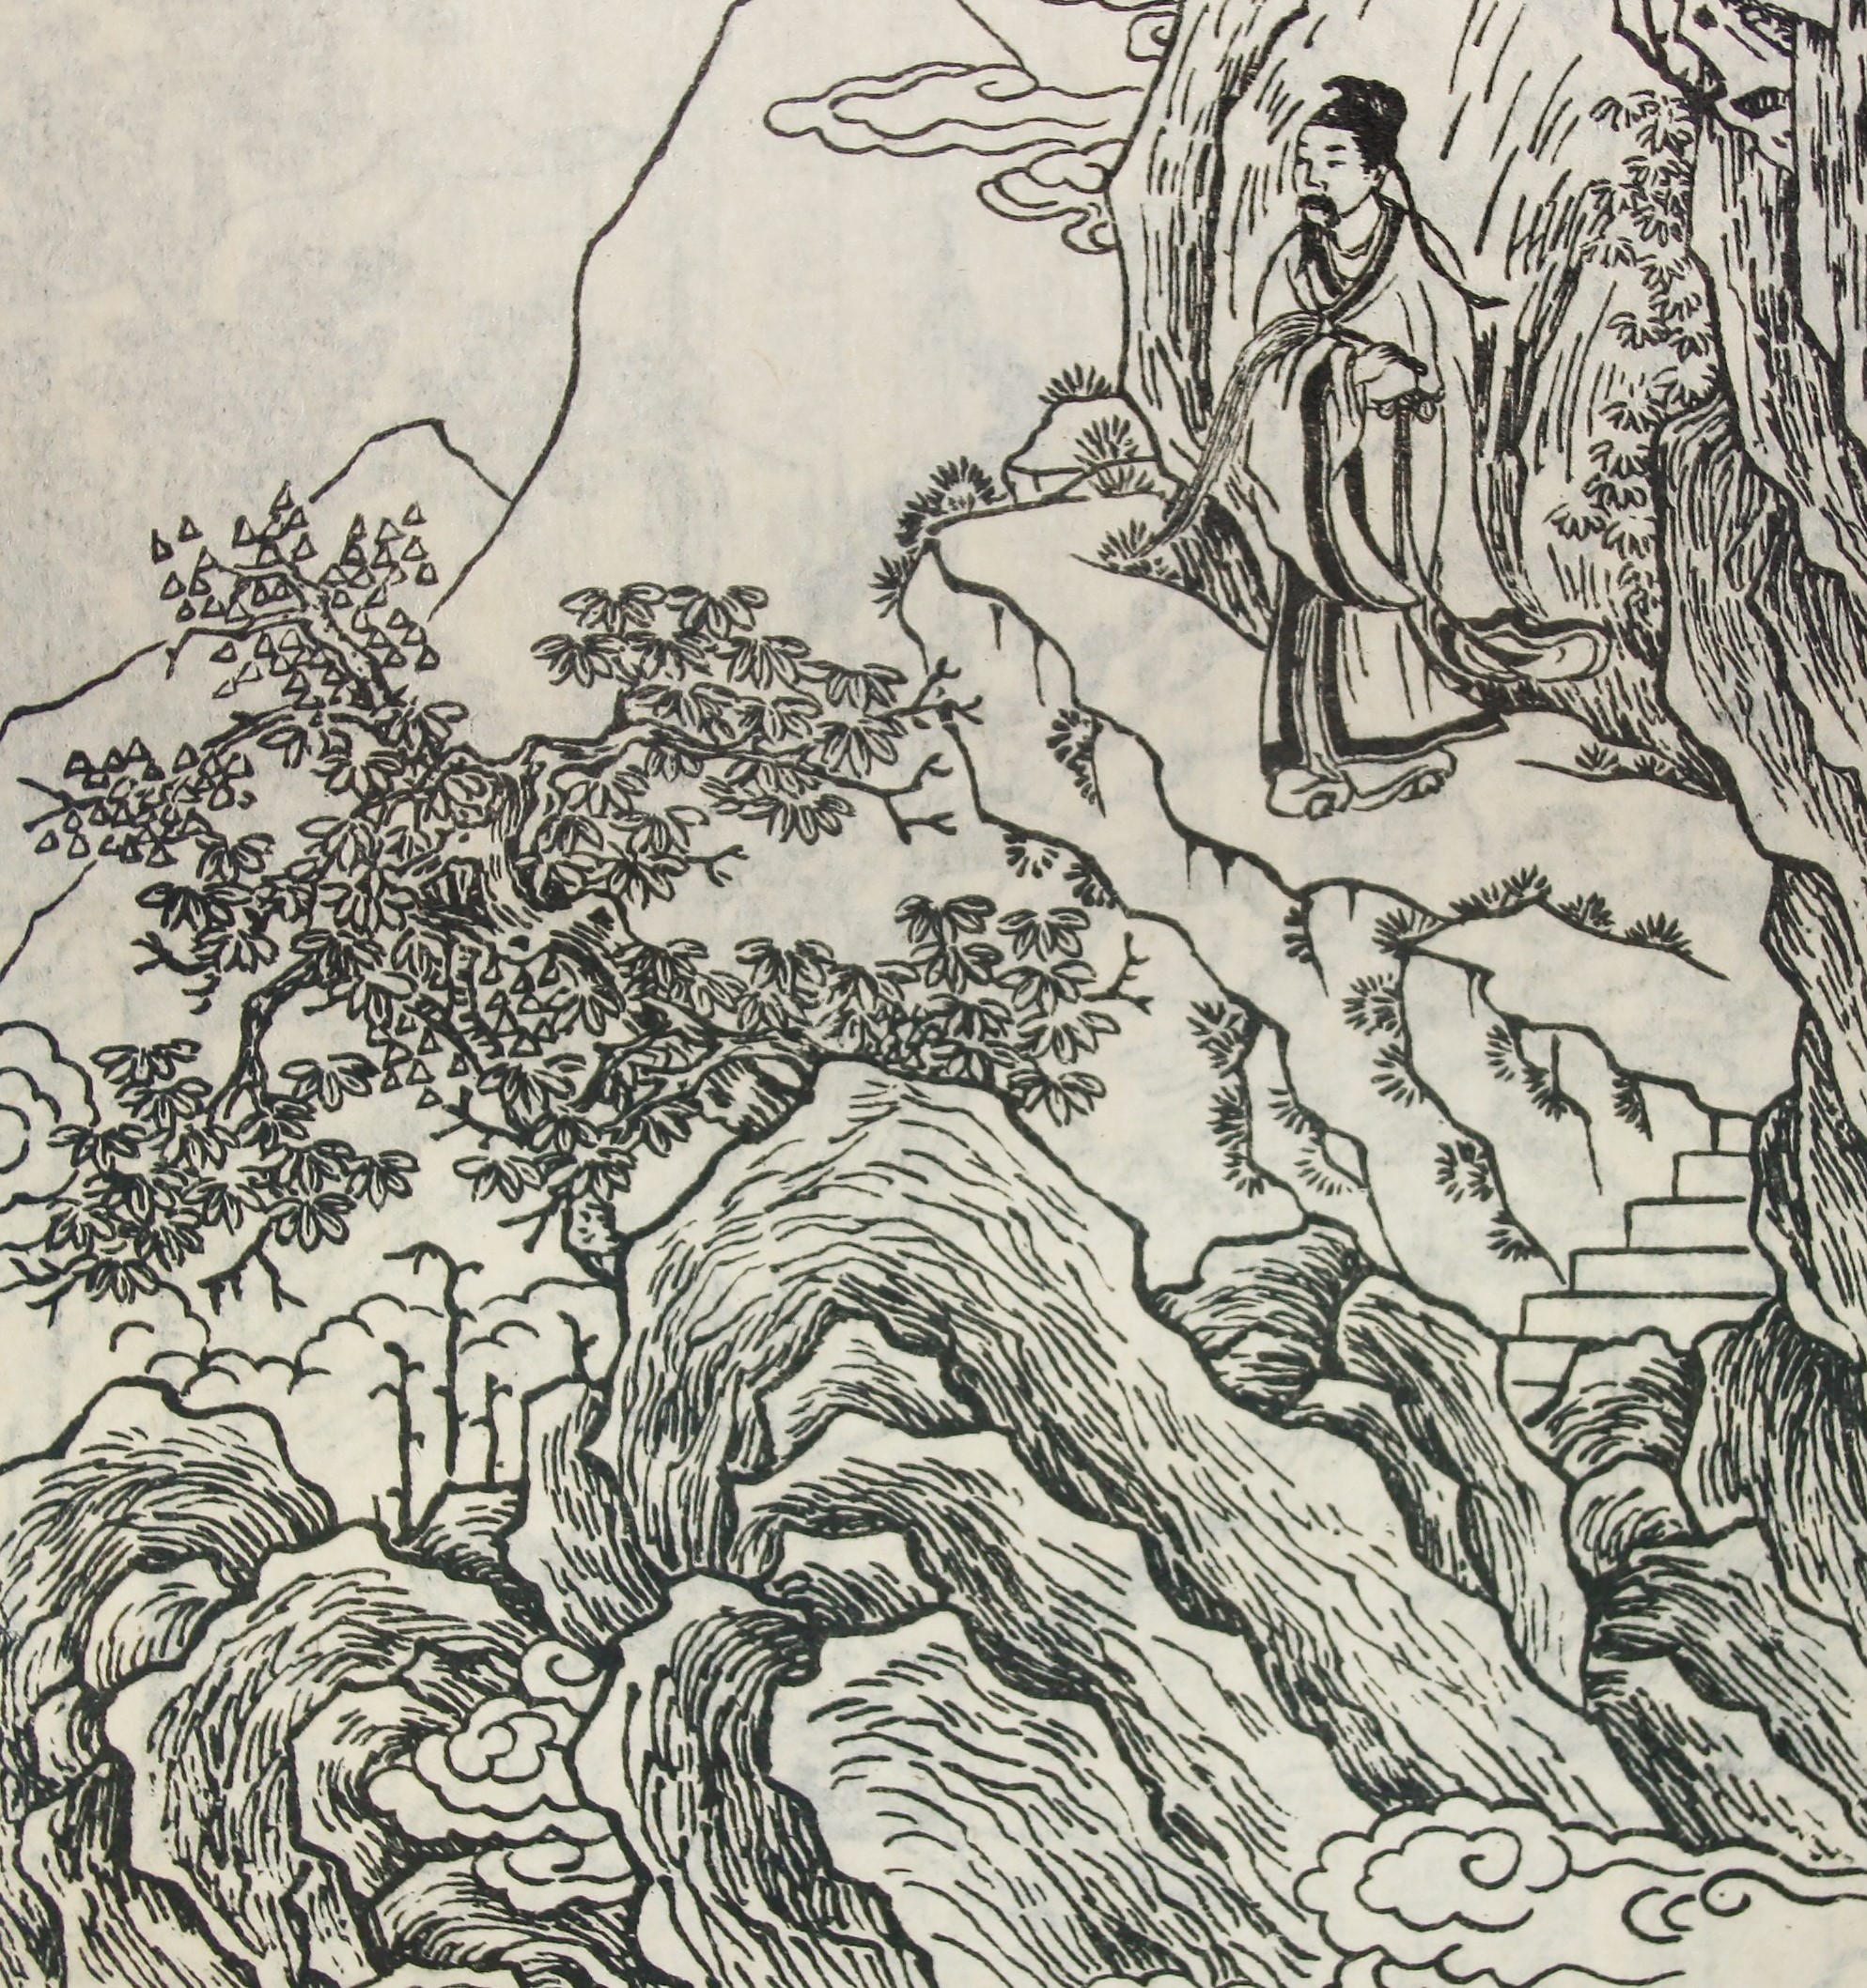 Black and white print showing a man dressed in Chinese clothing standing on a mountain path looking out to a landscape with a large tree in the foreground